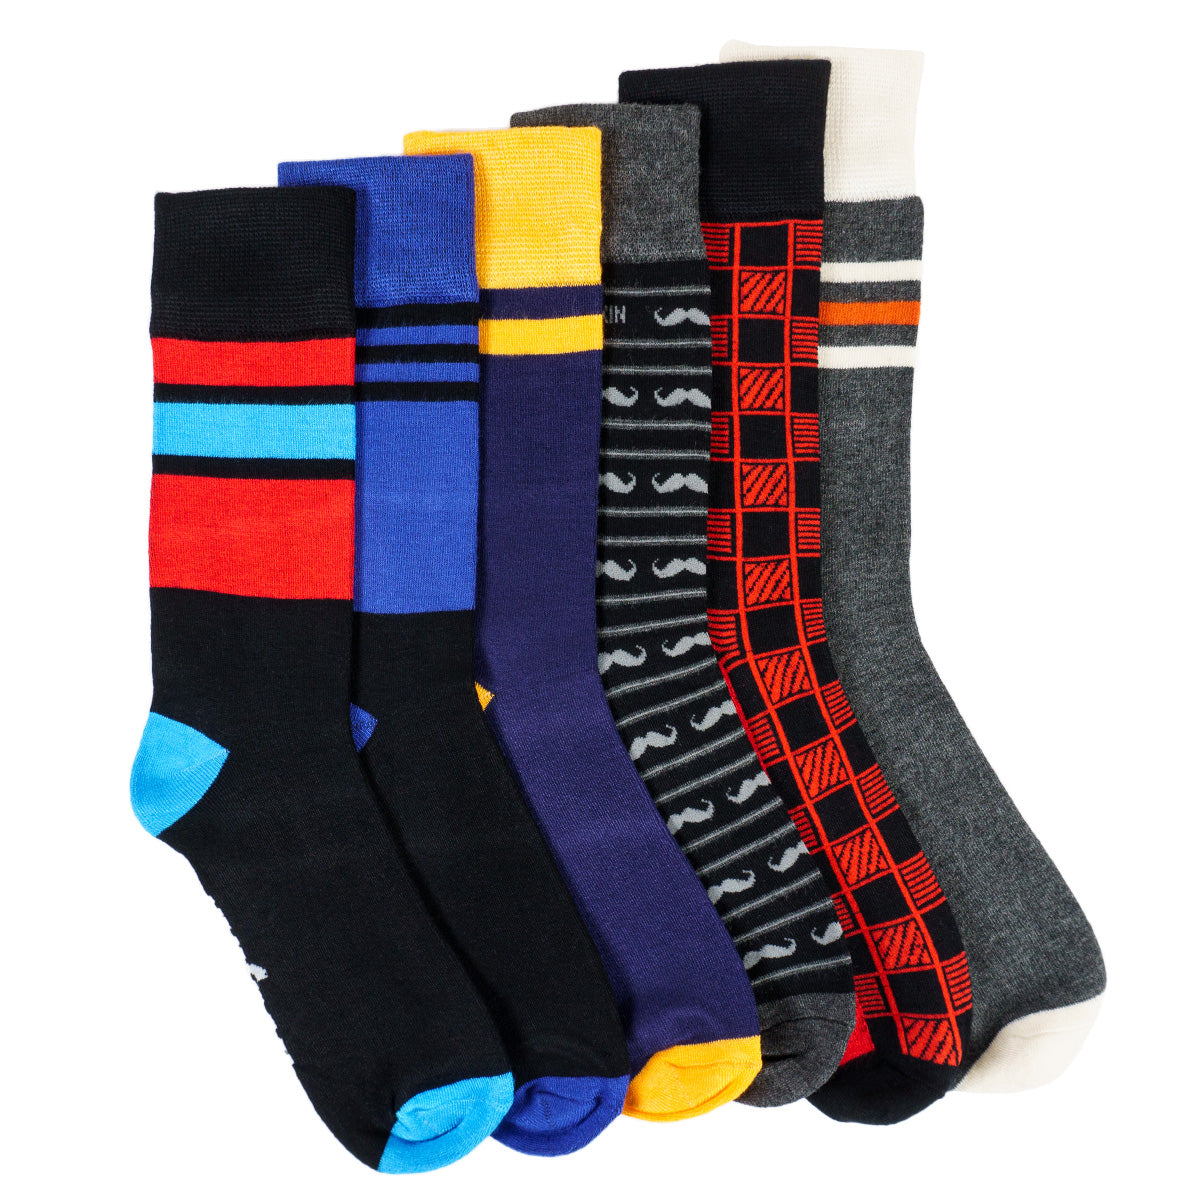 The “The Eccentric” Pack 6 pairs of selected Bodyskin socks